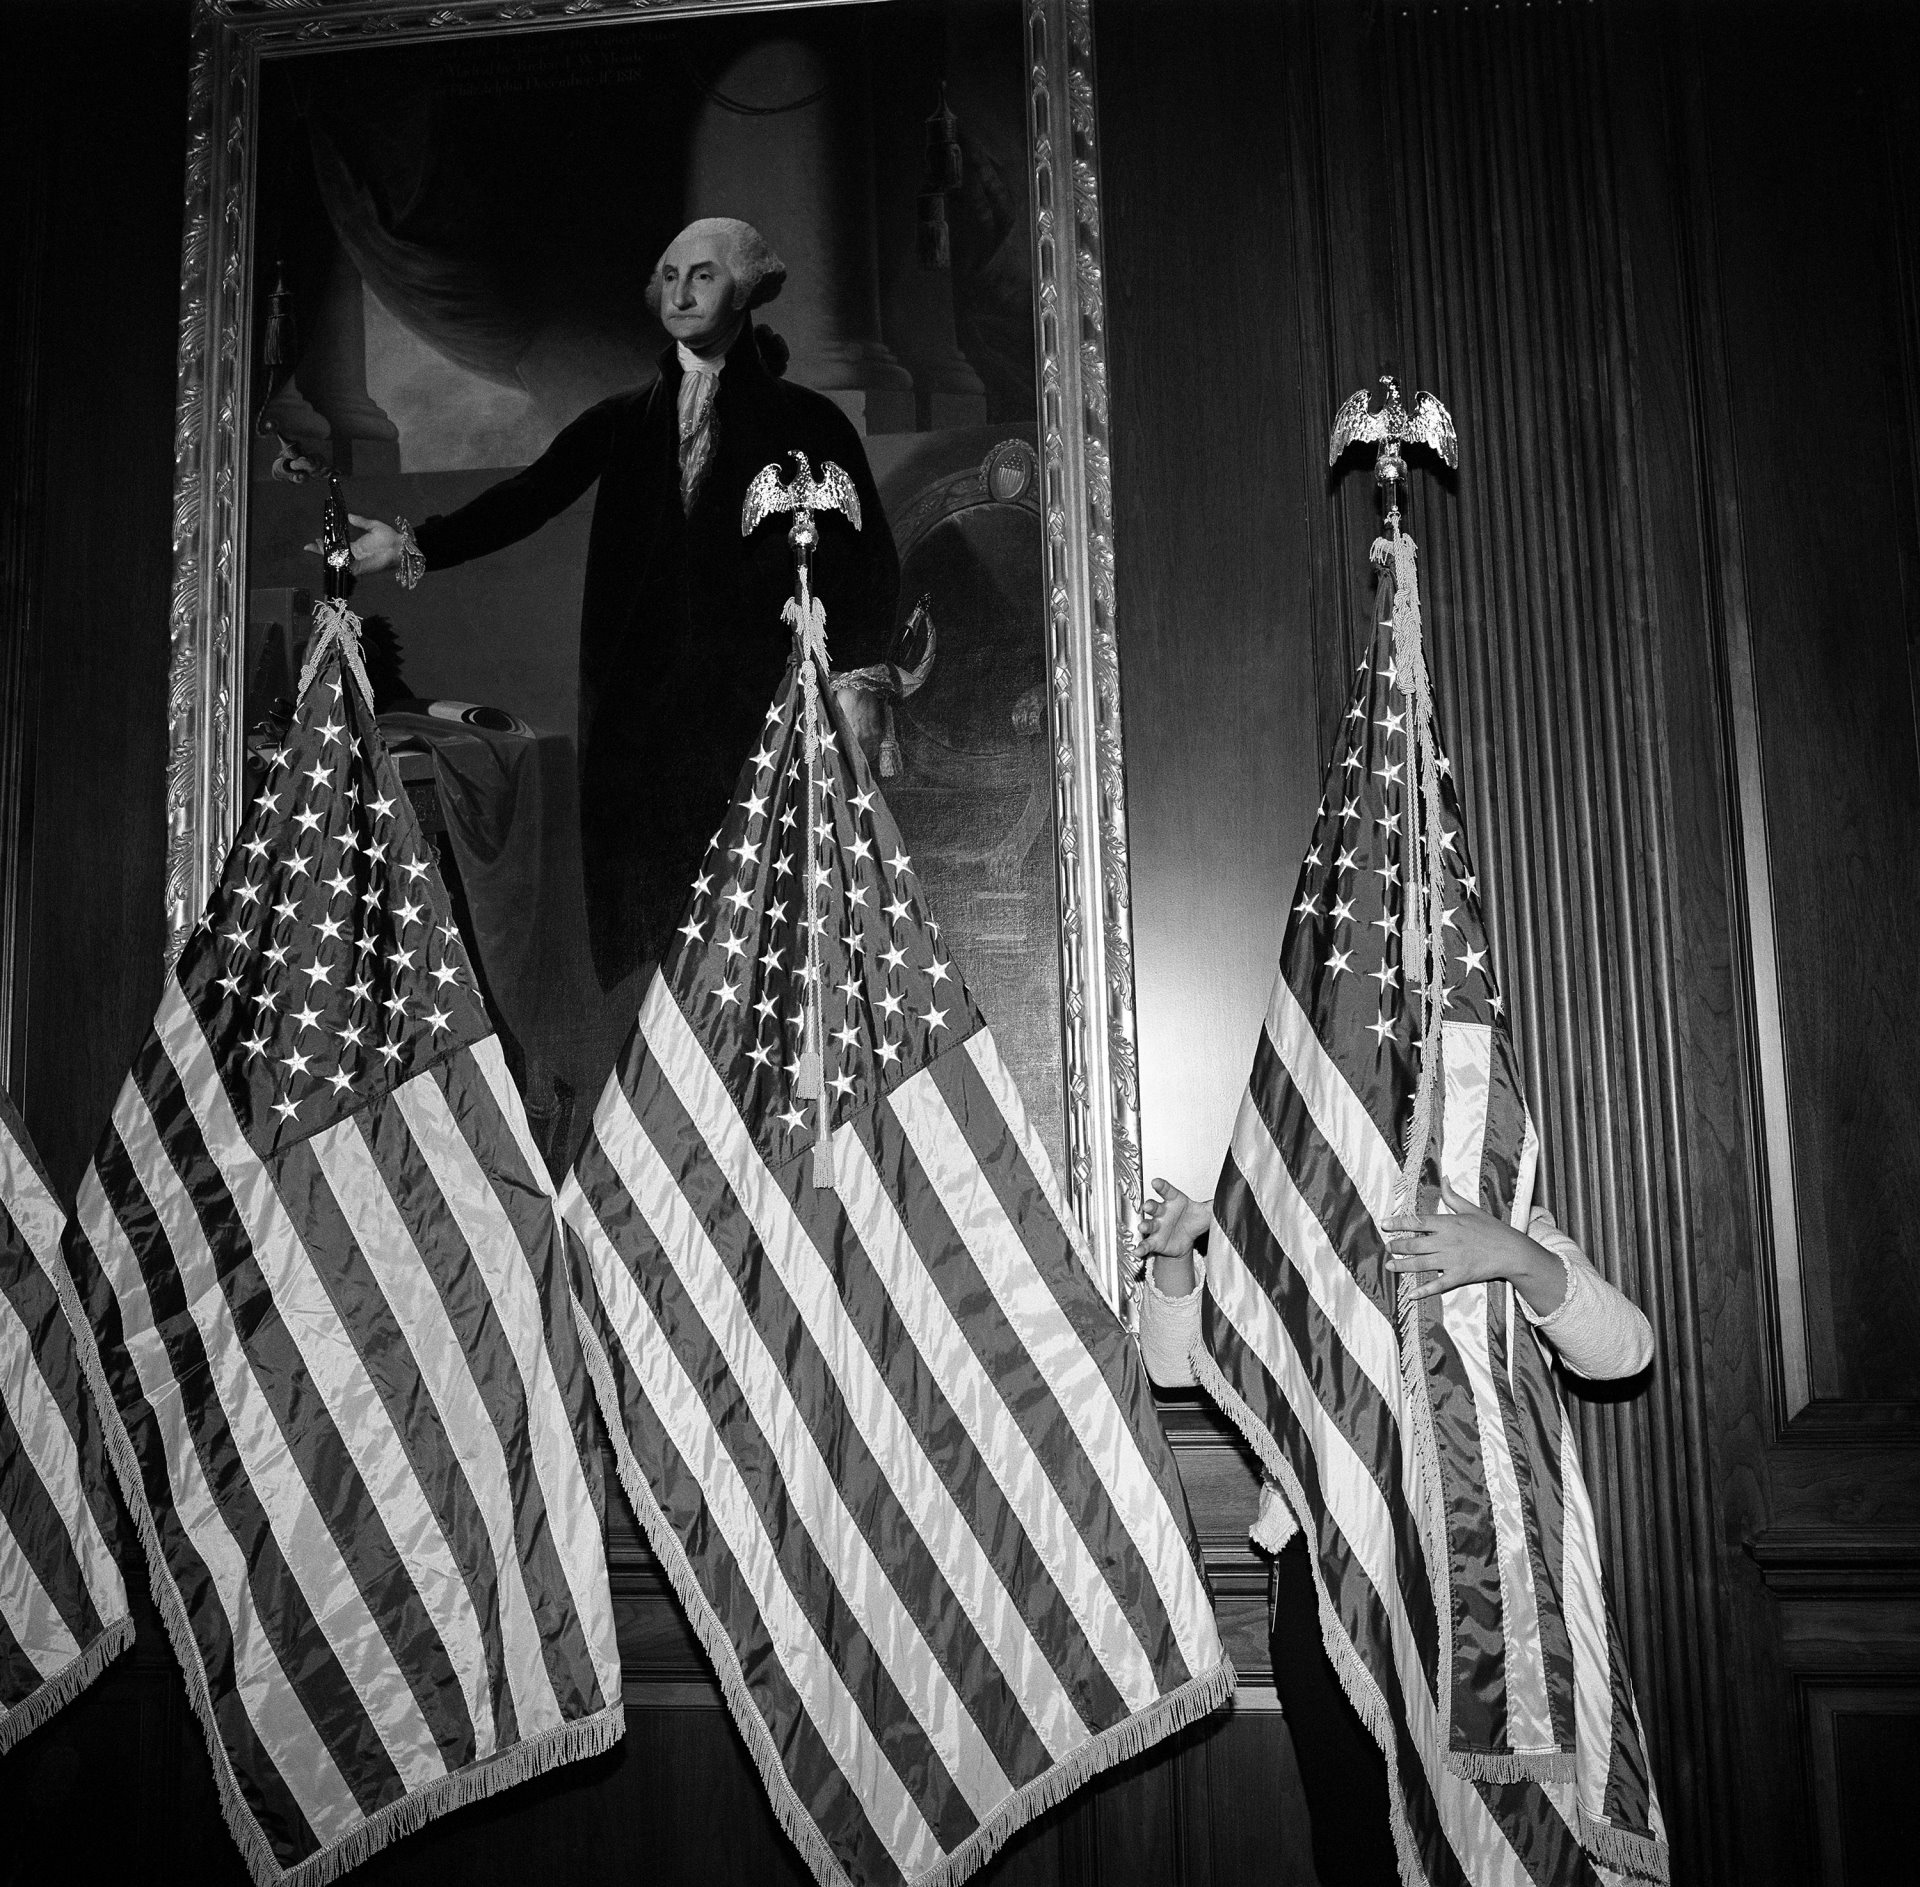 An aide to Speaker of the House of Representatives Nancy Pelosi adjusts a row of flags in front of a painting of George Washington, at the US Capitol, while preparing for Democratic leaders to speak after the vote to impeach President Donald Trump, on 18 December 2019 &ndash; the first of two occasions on which Trump was impeached. The US House of Representatives impeached the president for abusing his power by trying to coerce Ukraine into investigating Joe Biden, then a leading contender for the Democratic nomination to run against him, by allegedly threatening to withhold military aid. A second charge was laid &nbsp;against the president for obstructing Congress by ordering his administration to not cooperate with the investigation. Trump was later acquitted on both charges by the US Senate.